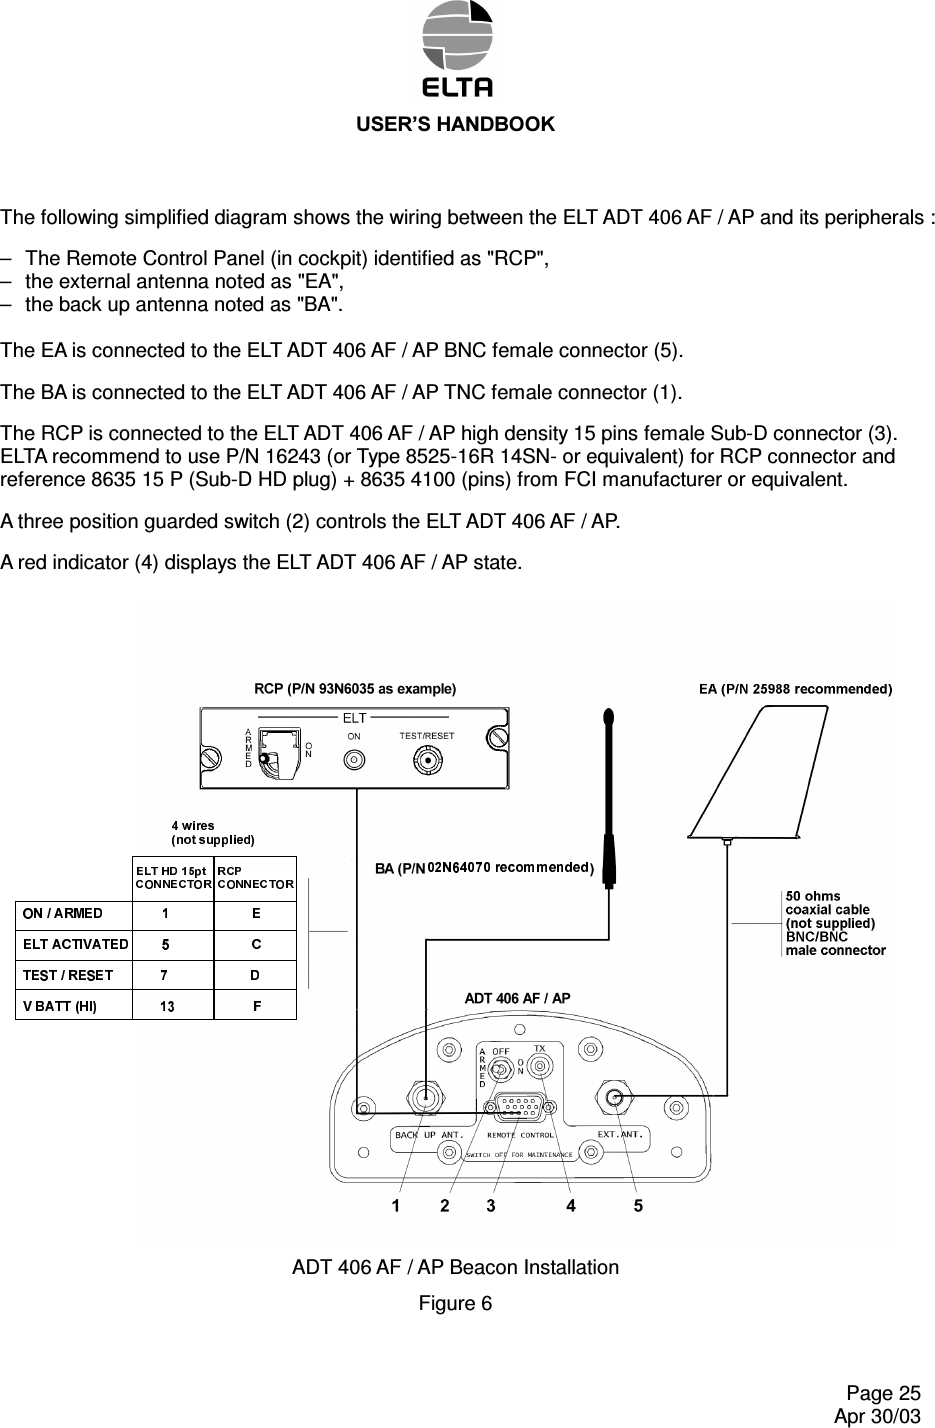 86(5¶6+$1&apos;%22.    Page 25   Apr 30/03 The following simplified diagram shows the wiring between the ELT ADT 406 AF / AP and its peripherals : –  The Remote Control Panel (in cockpit) identified as &quot;RCP&quot;, –  the external antenna noted as &quot;EA&quot;, –  the back up antenna noted as &quot;BA&quot;.  The EA is connected to the ELT ADT 406 AF / AP BNC female connector (5). The BA is connected to the ELT ADT 406 AF / AP TNC female connector (1). The RCP is connected to the ELT ADT 406 AF / AP high density 15 pins female Sub-D connector (3). ELTA recommend to use P/N 16243 (or Type 8525-16R 14SN- or equivalent) for RCP connector and reference 8635 15 P (Sub-D HD plug) + 8635 4100 (pins) from FCI manufacturer or equivalent. A three position guarded switch (2) controls the ELT ADT 406 AF / AP. A red indicator (4) displays the ELT ADT 406 AF / AP state. ADT 406 AF / AP Beacon Installation  Figure 6 